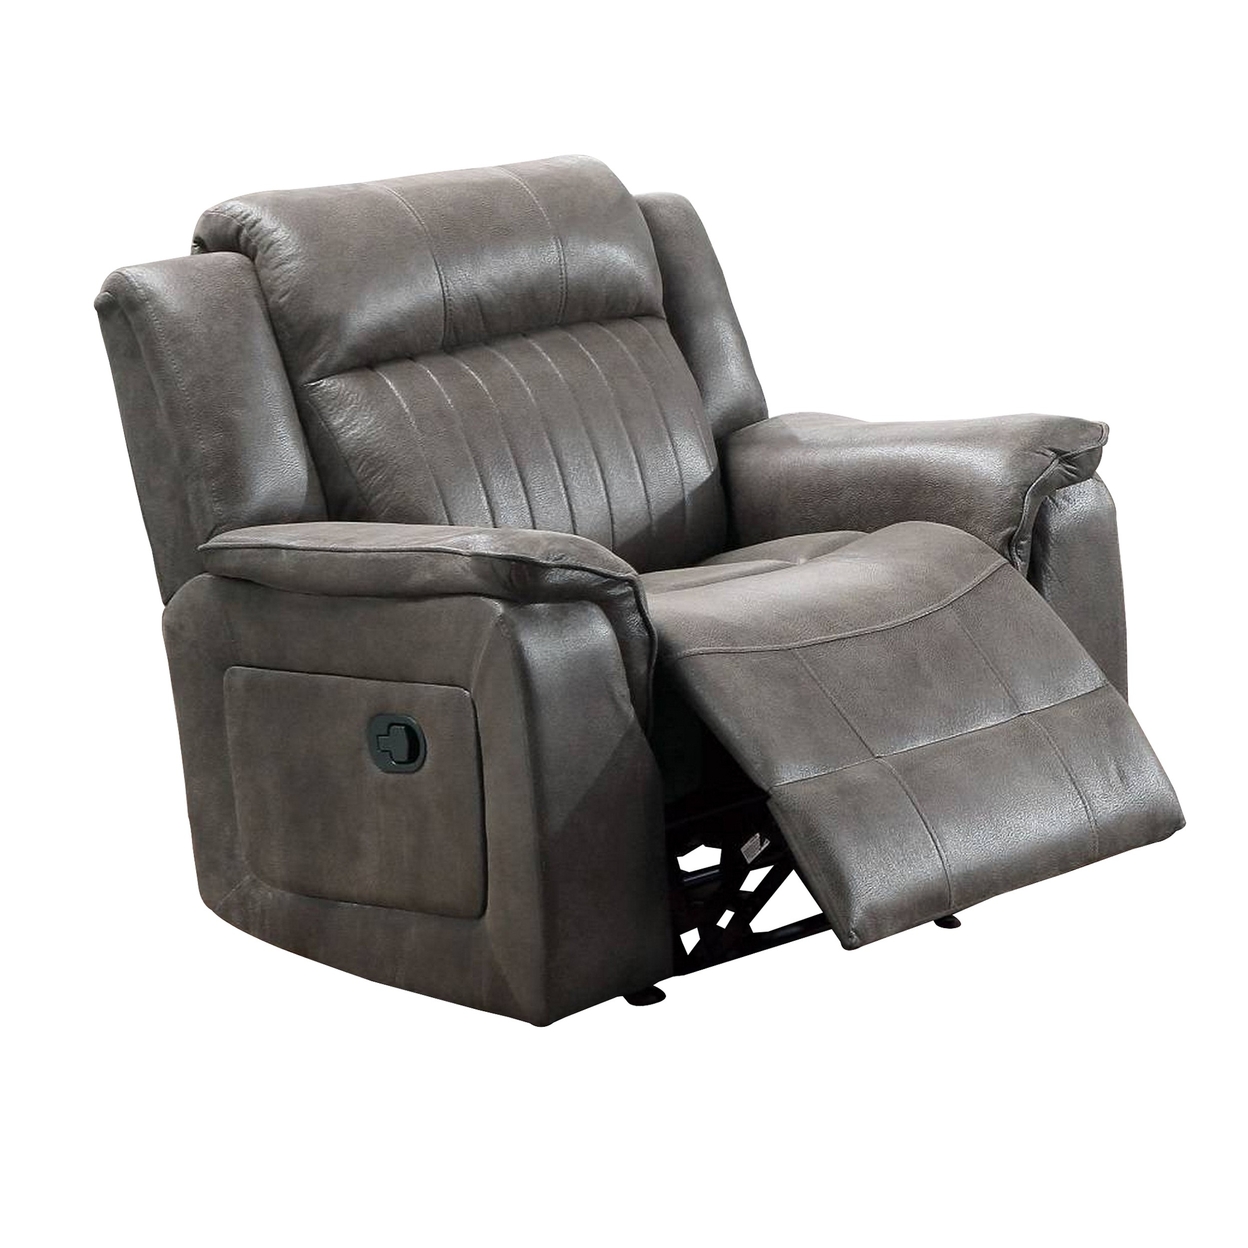 Oya 40 Inch Power Recliner Chair With Pull Tab, Slate Blue Faux Leather- Saltoro Sherpi